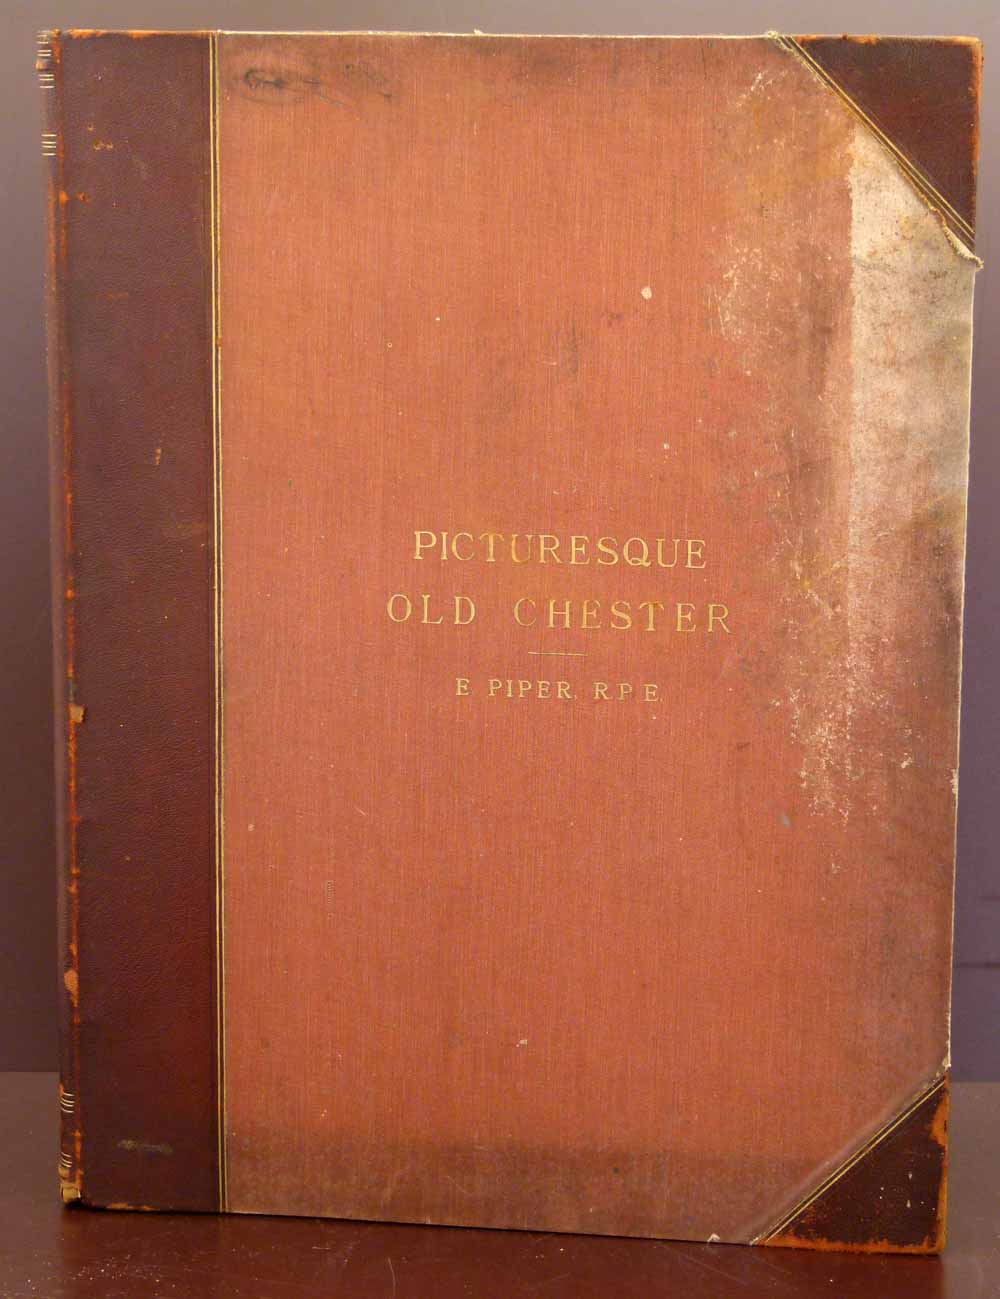 Piper, E: Picturesque Old Chester, pub Frost & Reed, 1893, folio containing a series of 12 signed